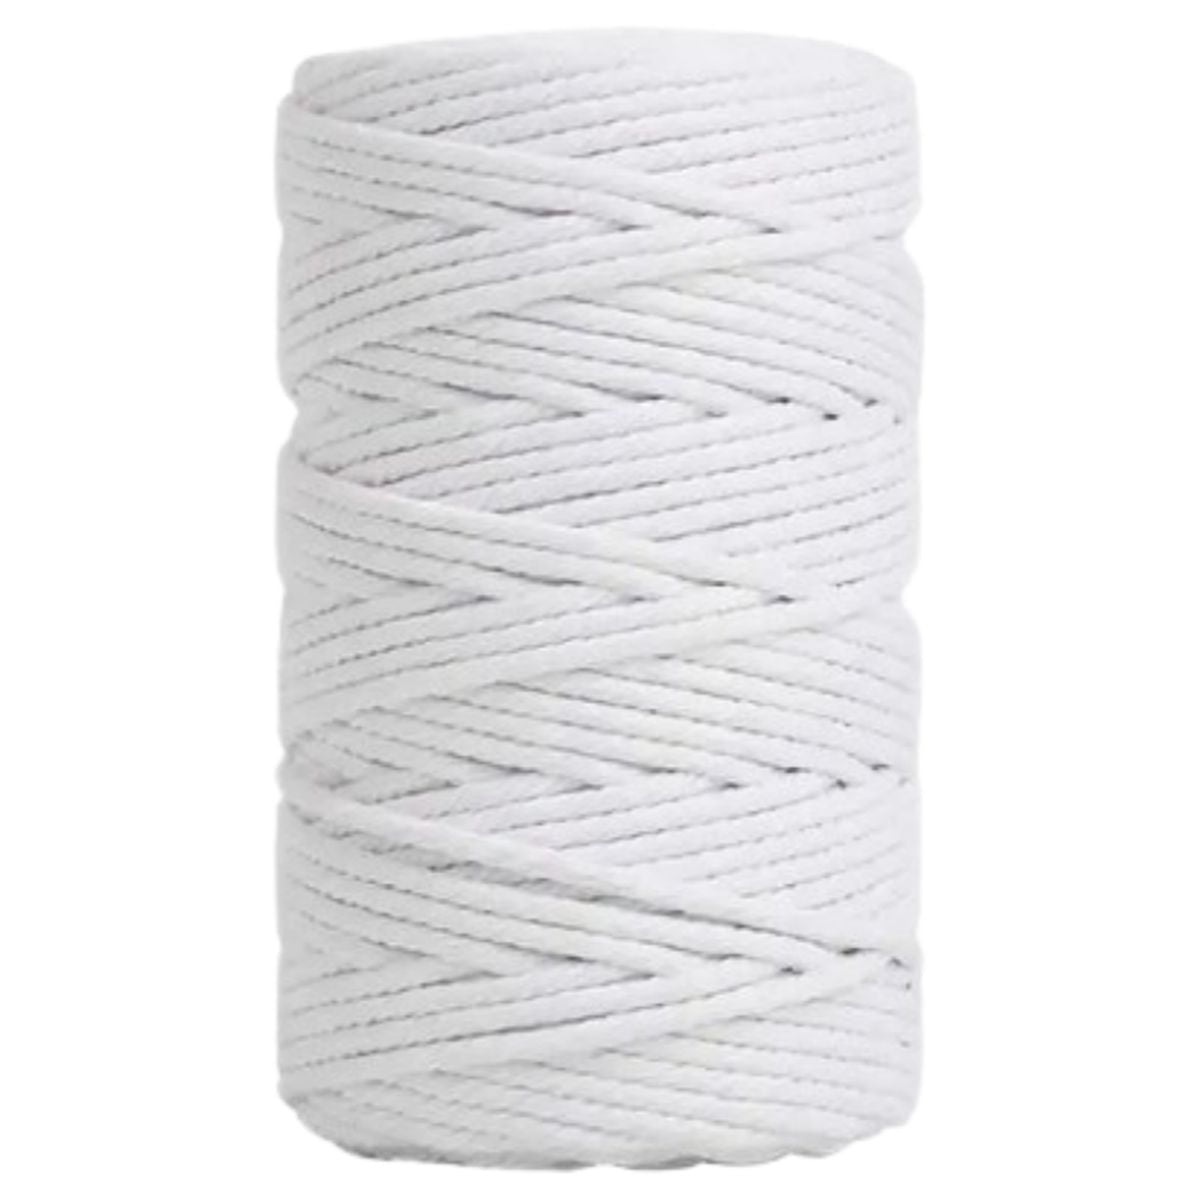 2 PACKS Bakers Twine, 656 Feet 2mm Striped Cotton Twine Ribbon